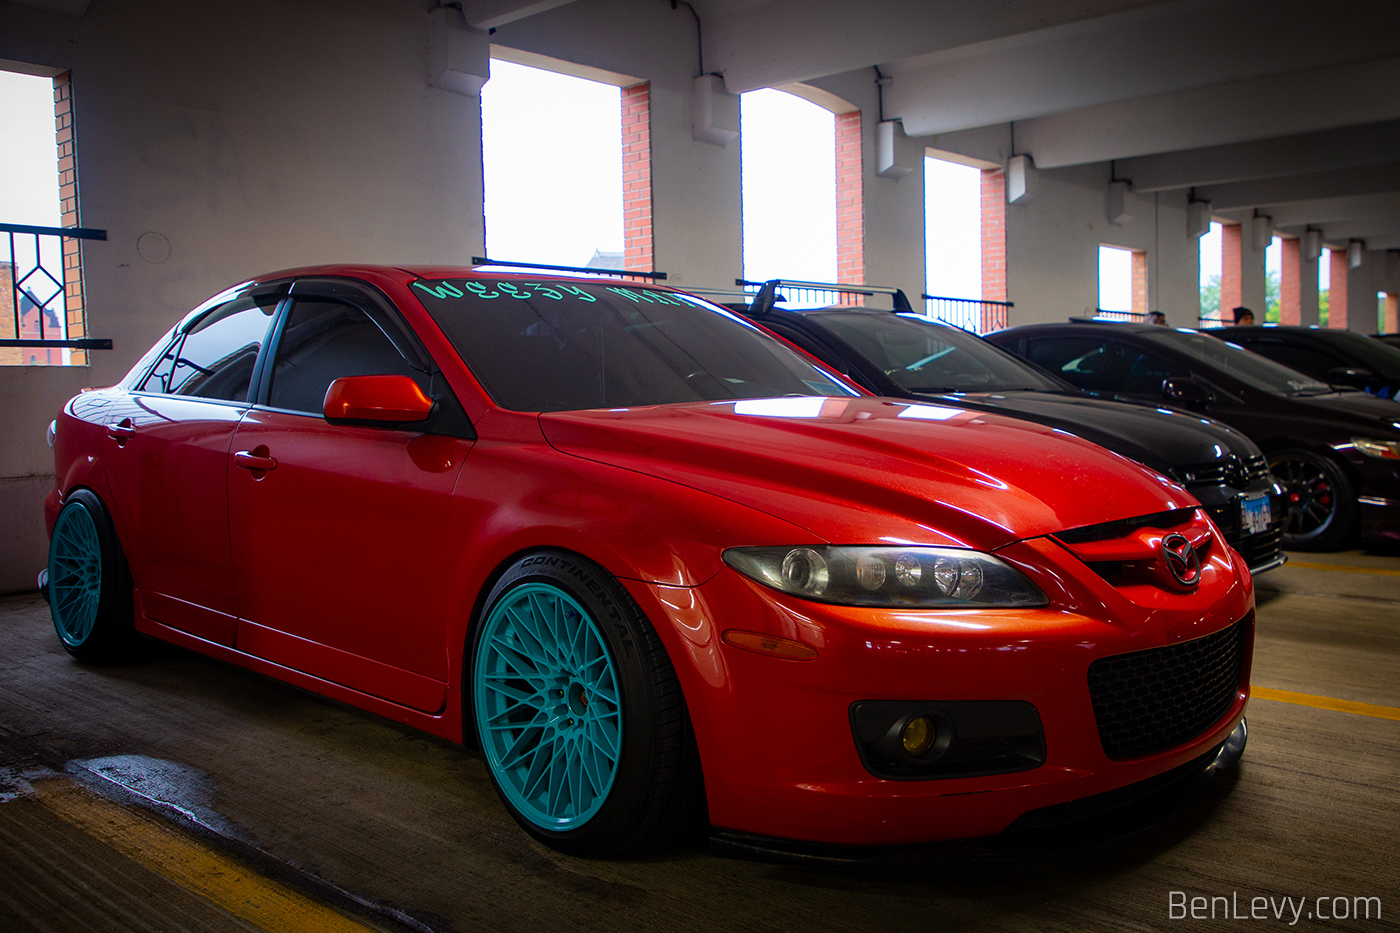 Red Mazdaspeed6 at the Parking Garage Party